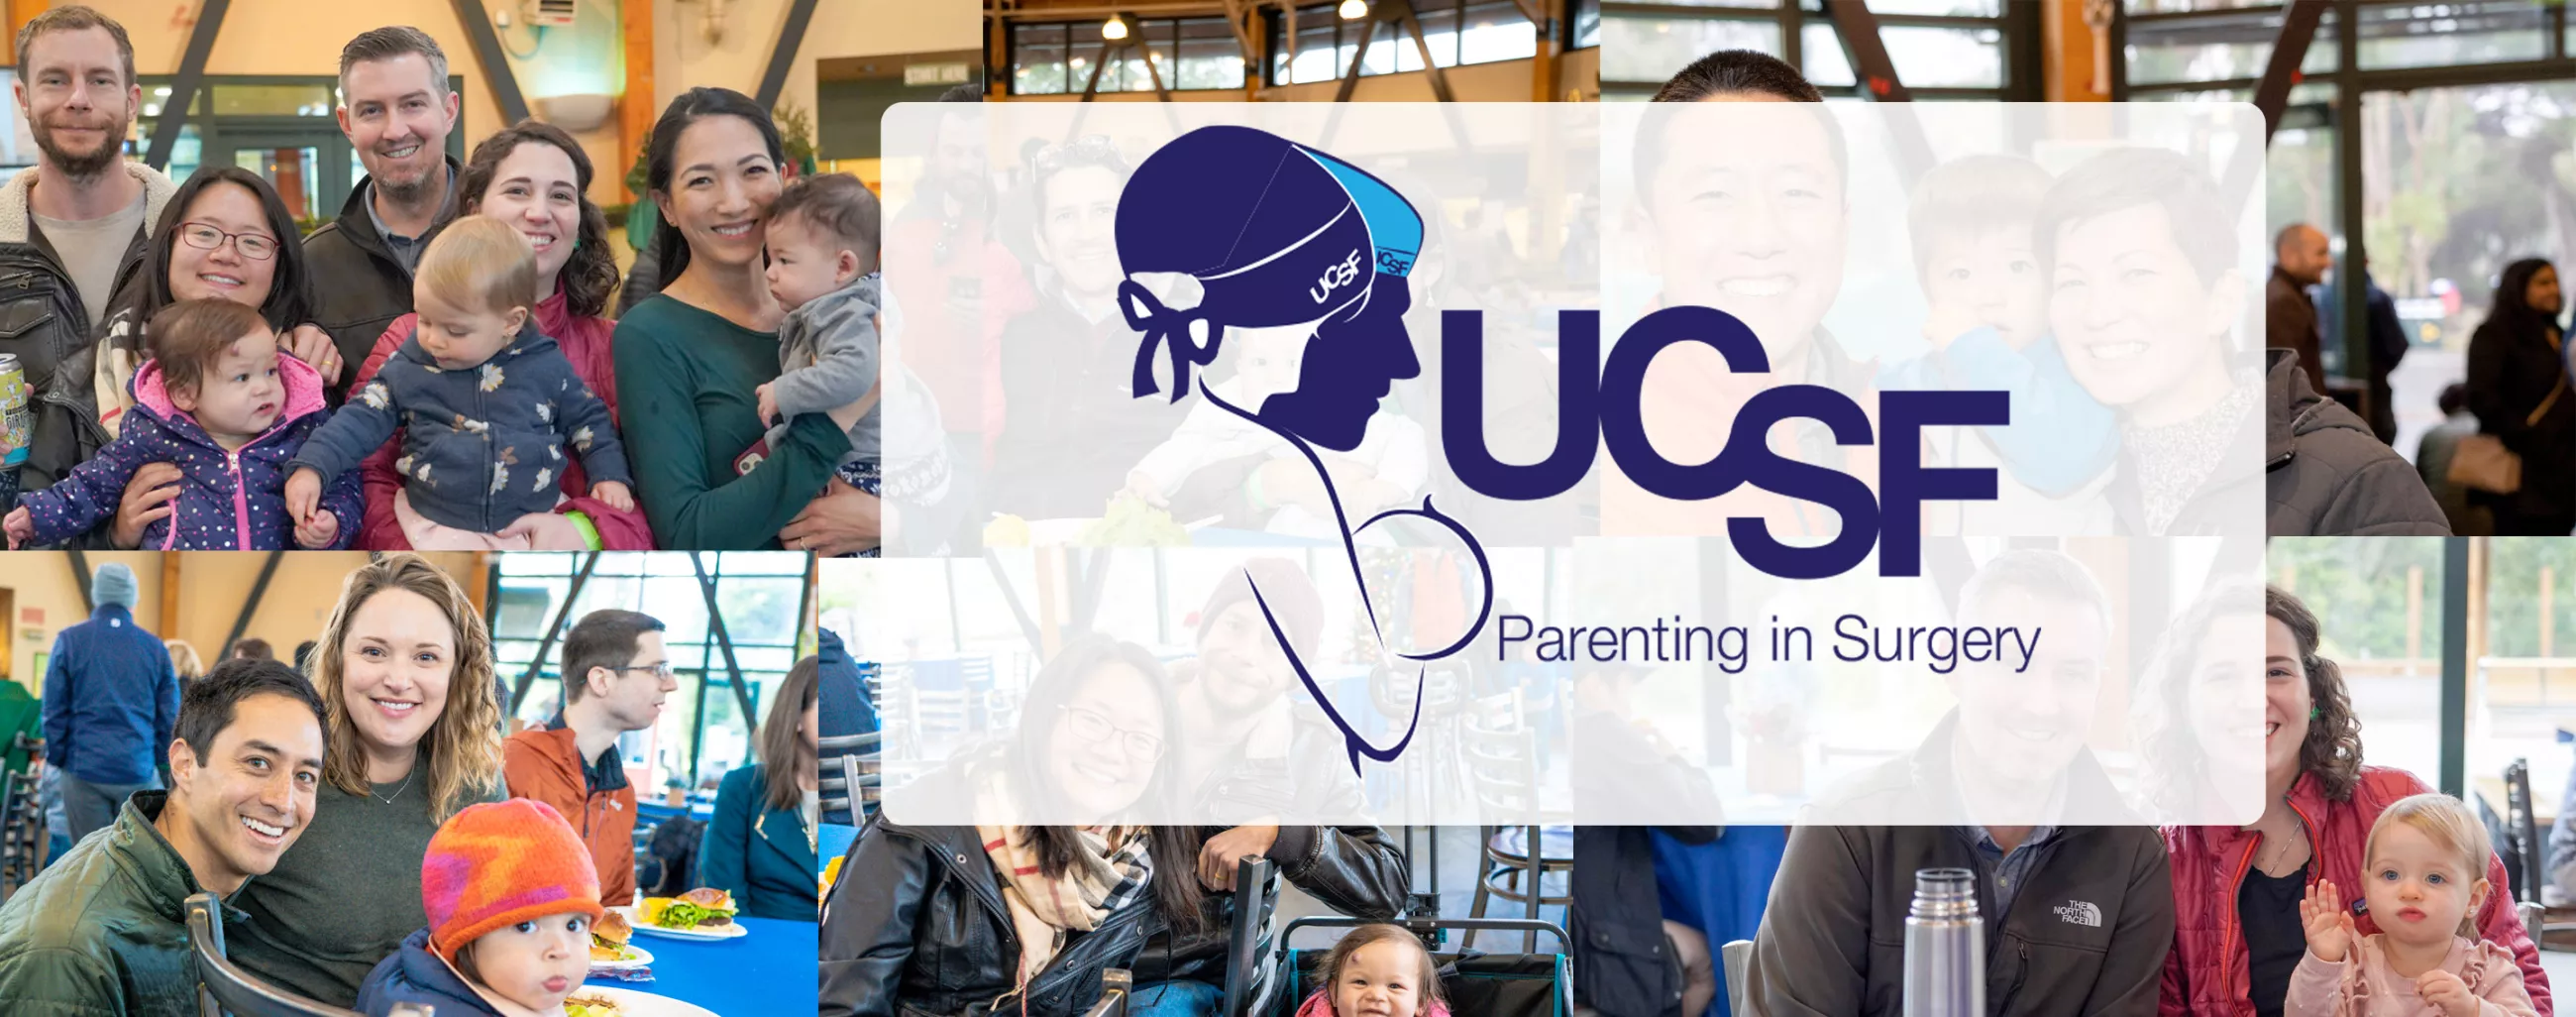 Parenting in Surgery collage banner